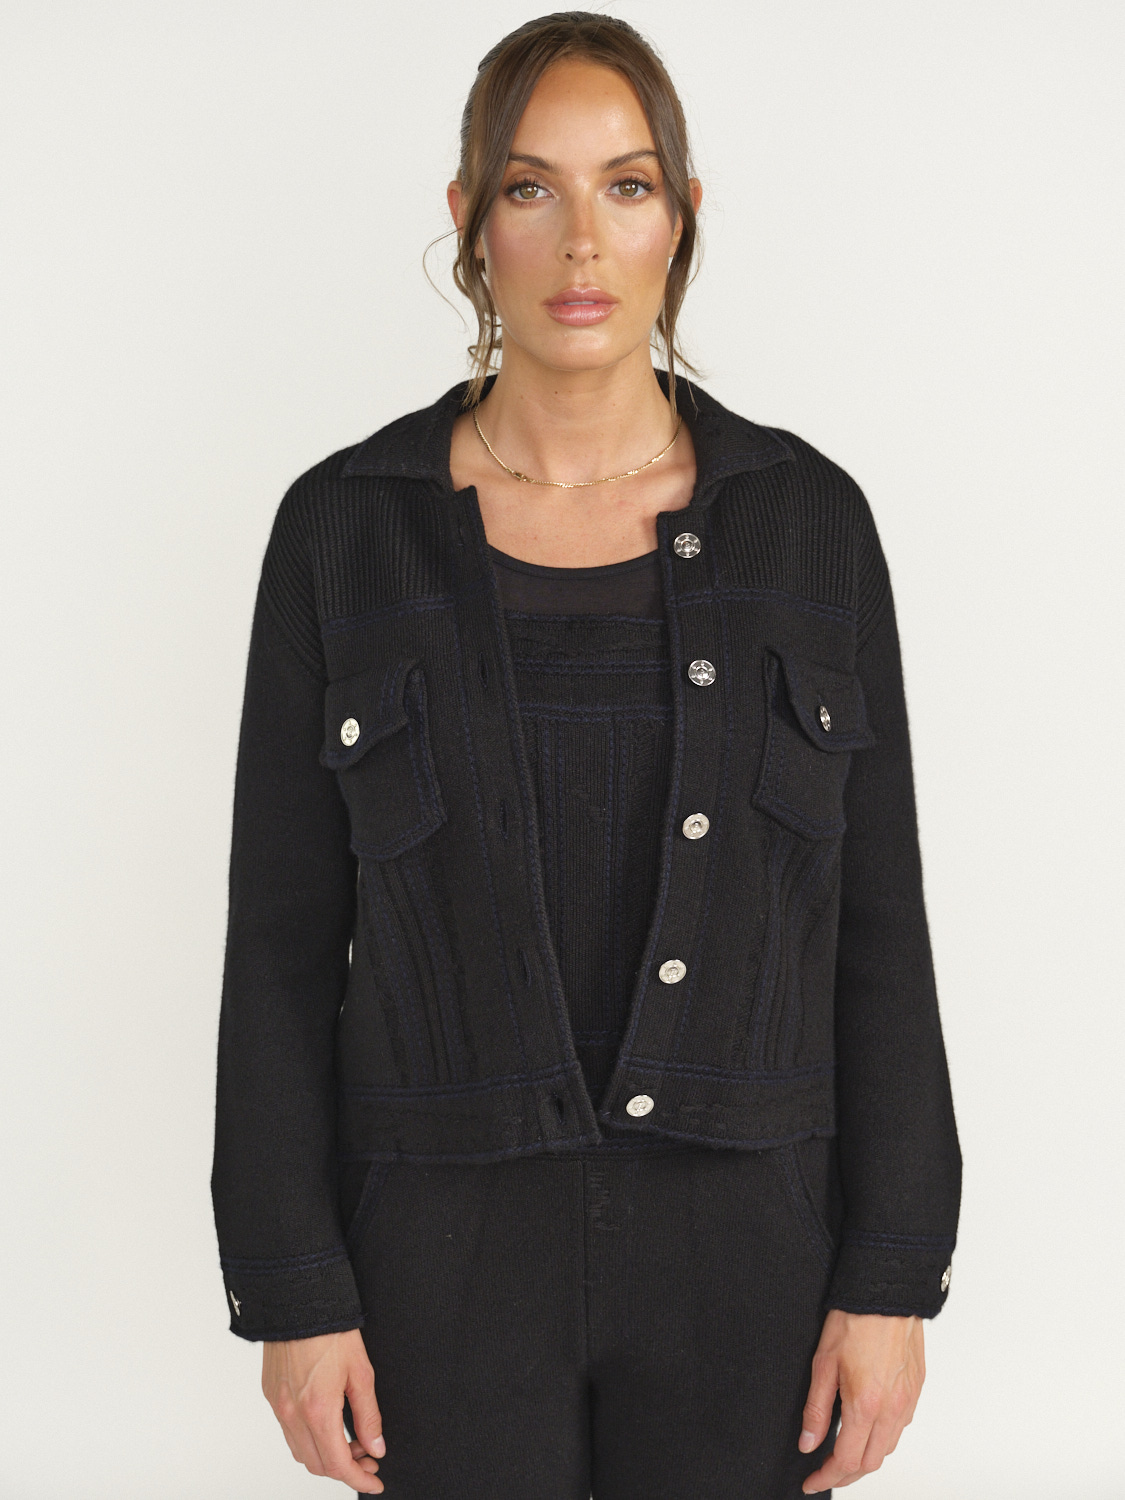 Barrie Barrie - Cardigan -  made of cashmere   black S